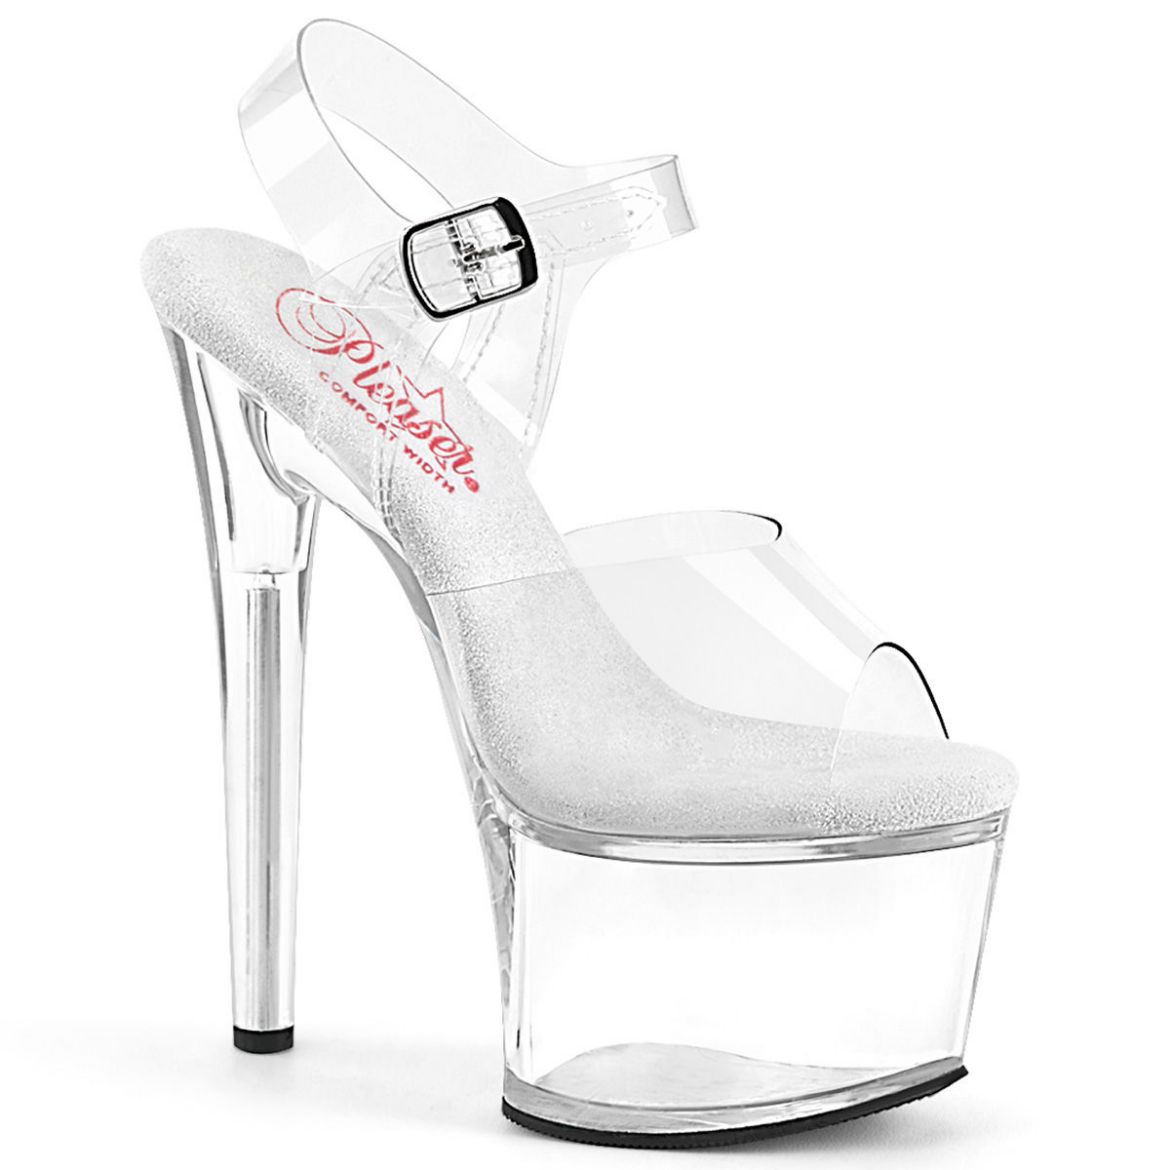 Image of Pleaser PASSION-708 Clr/Clr 7 Inch Heel 2 3/4 Inch PF Ankle Strap Sandal